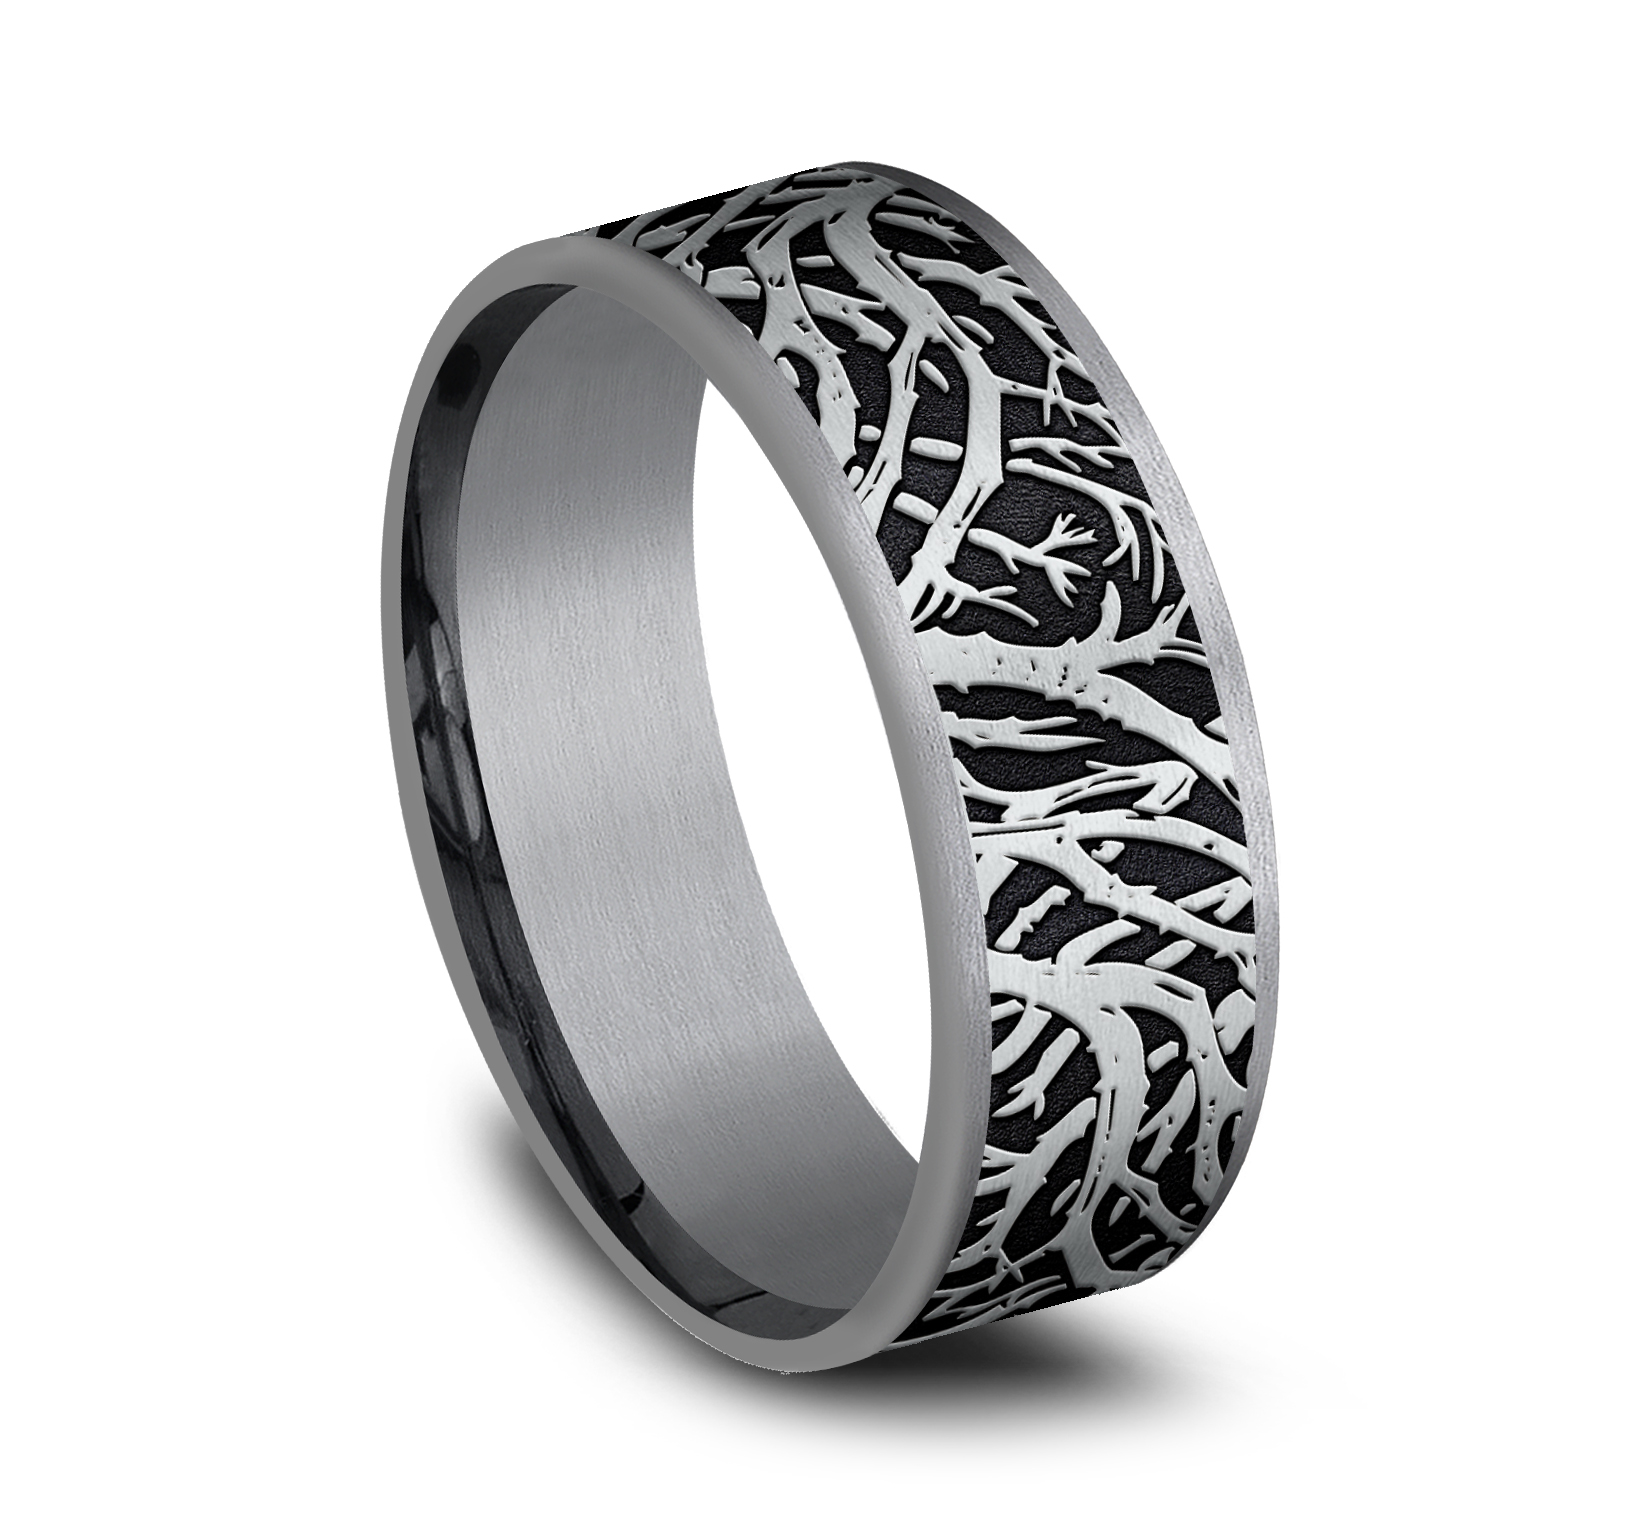 Tantalum Men's Band with 14k White Gold Enchanted Forest Motif, 7.5mm